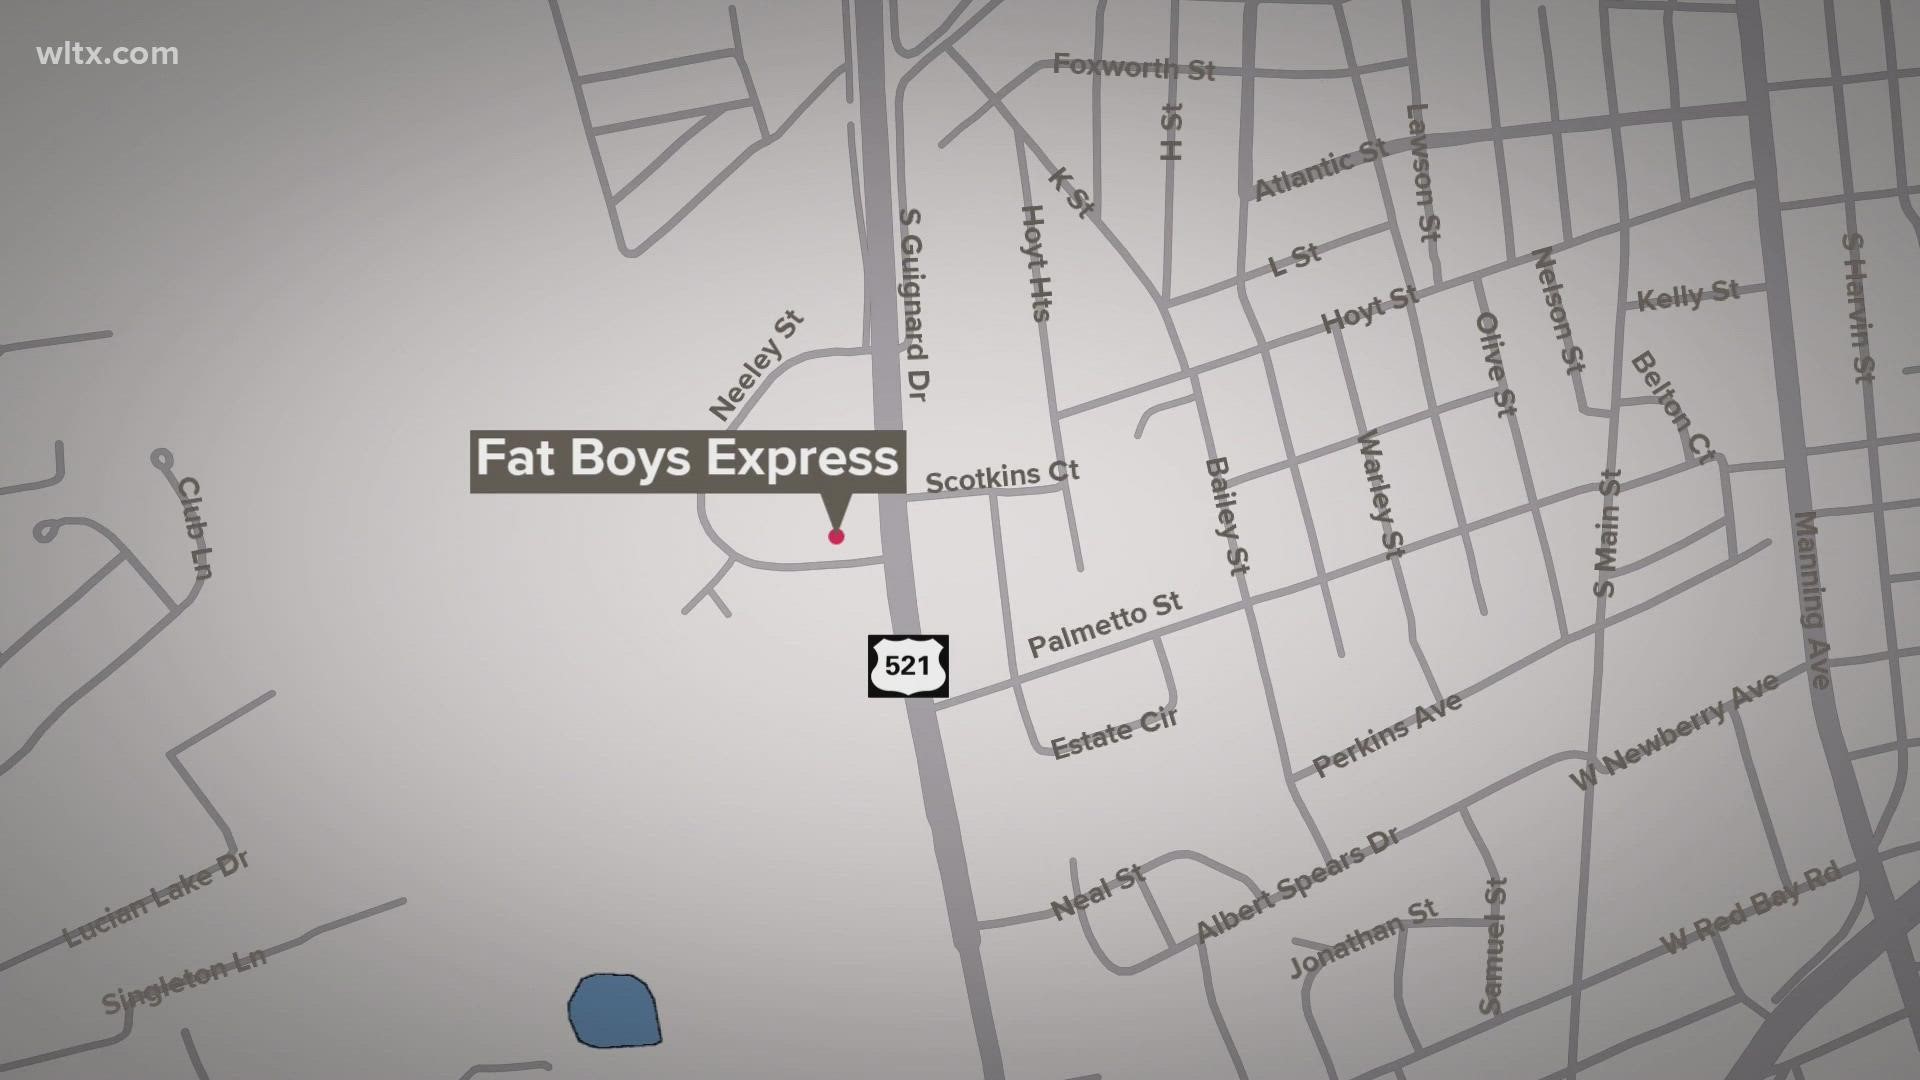 The shooting happened at Fat Boys Express on South Guignard drive.